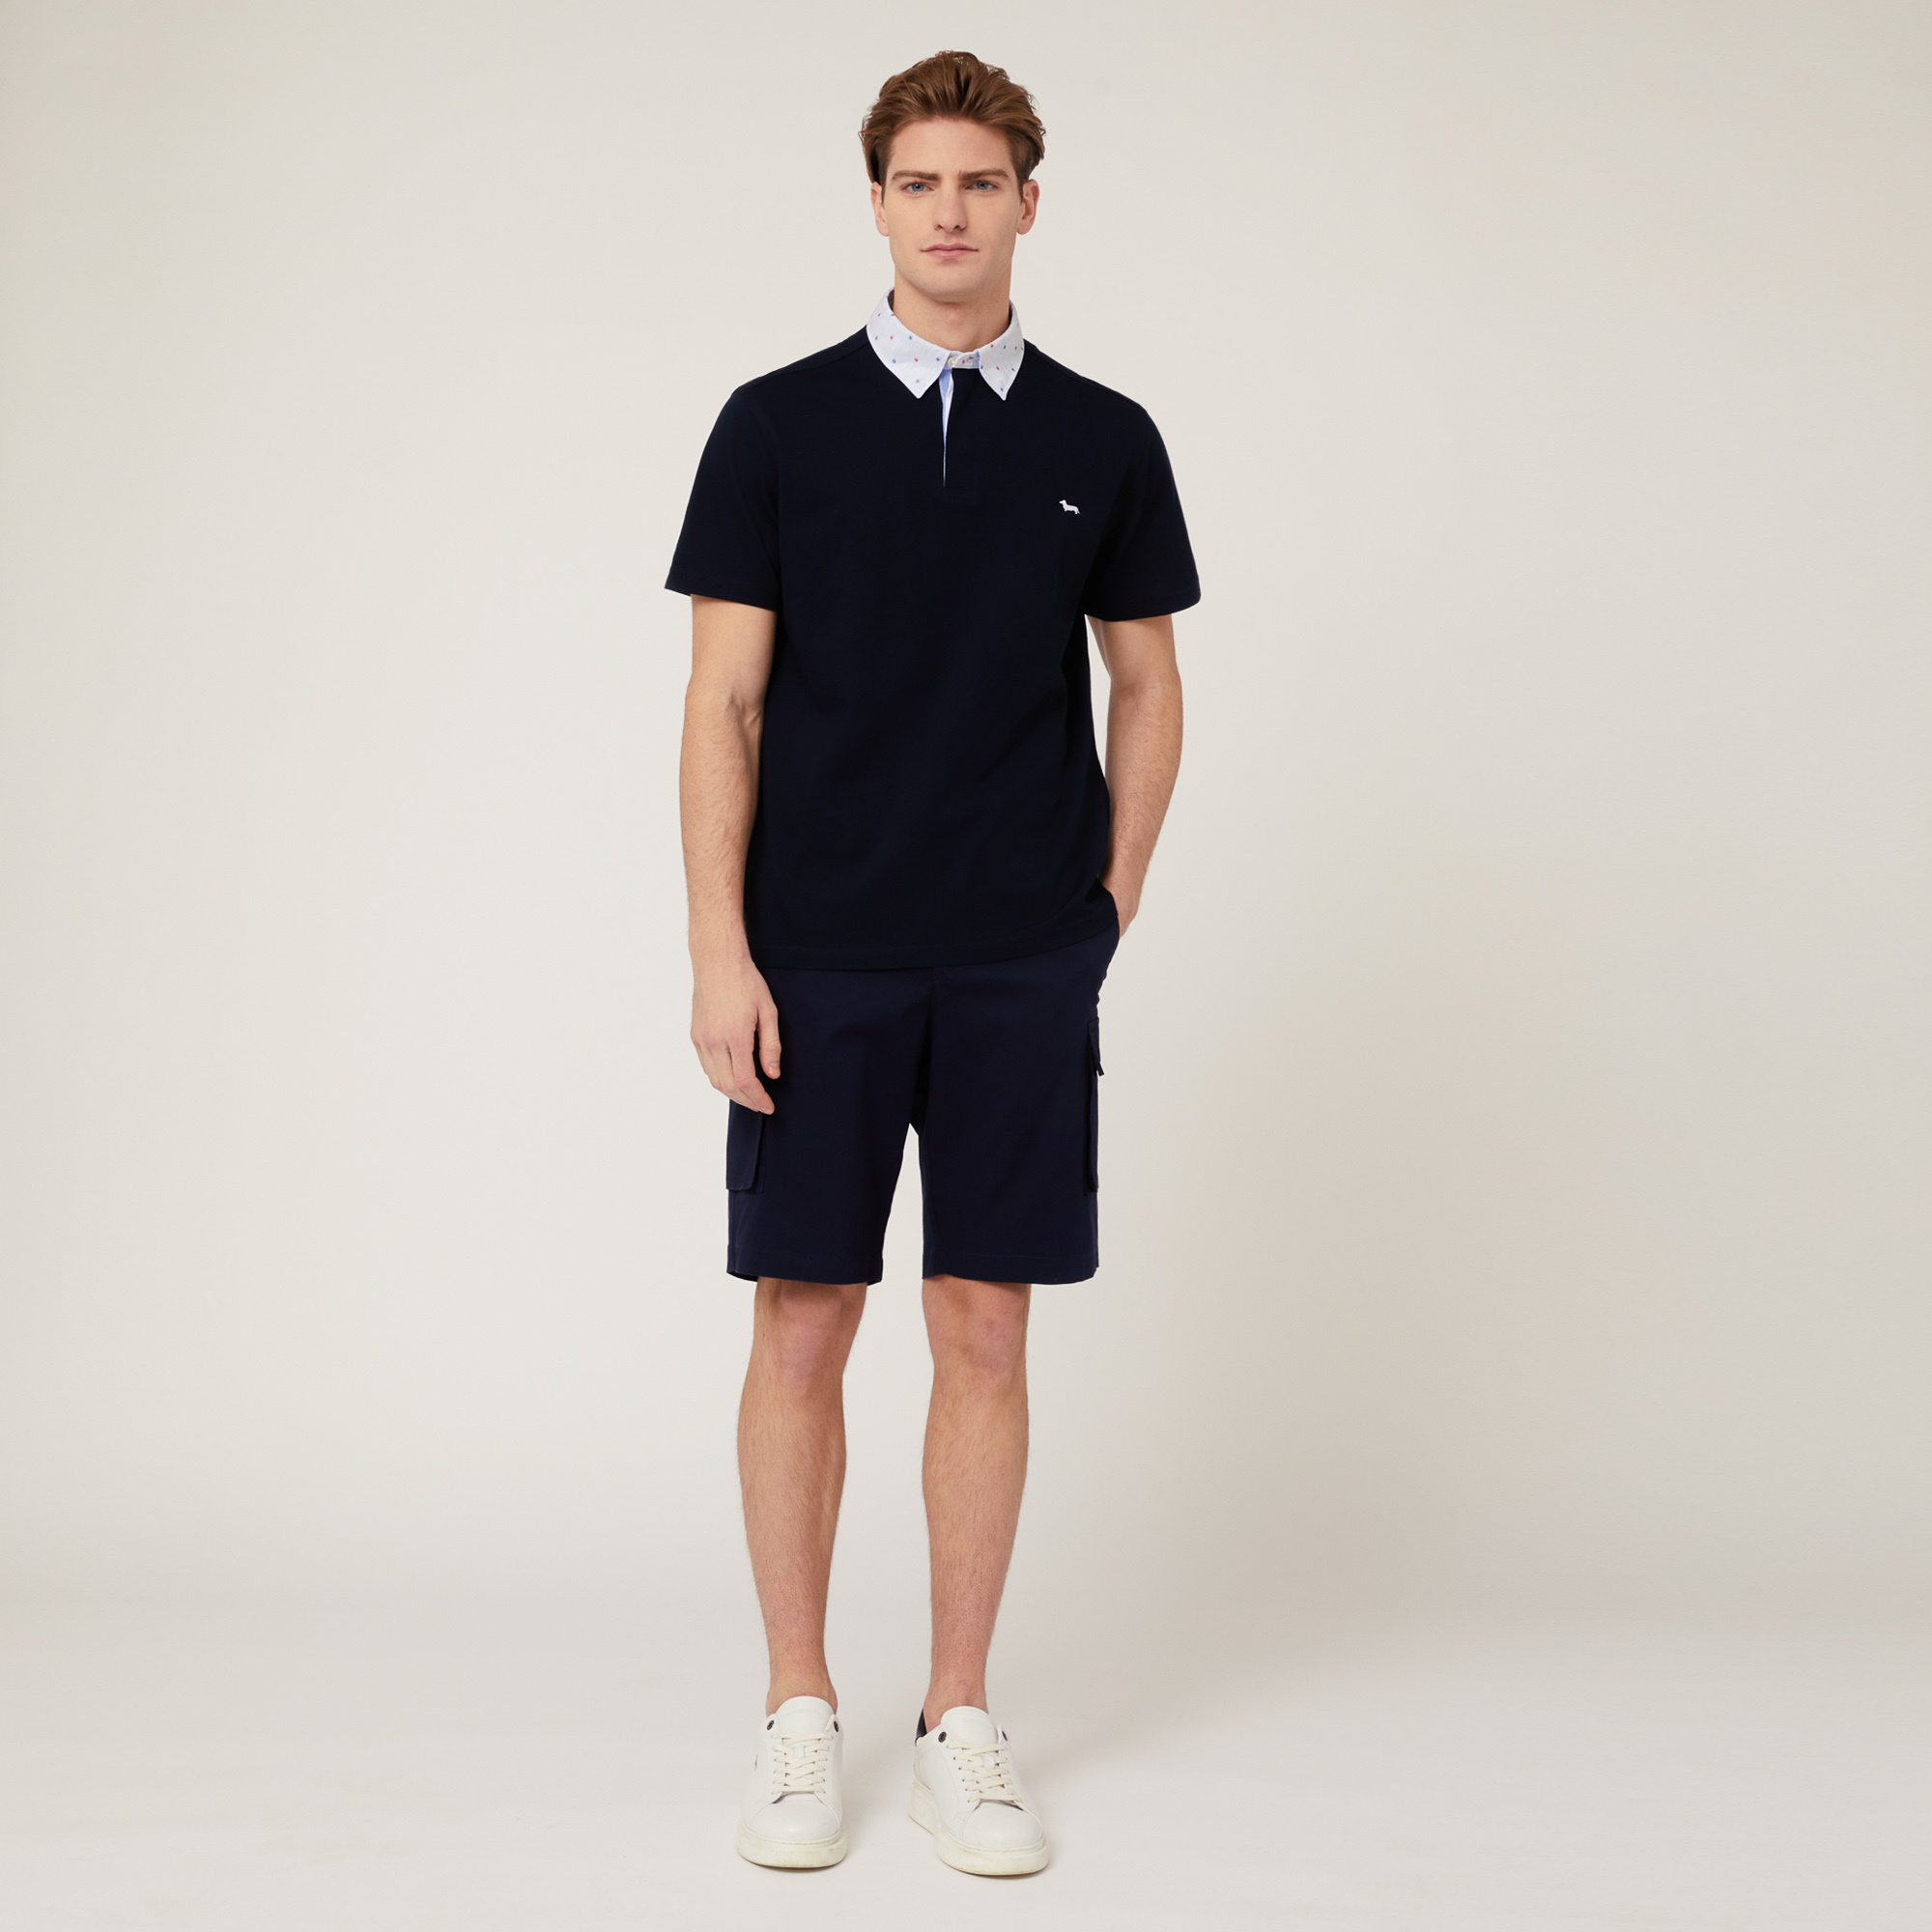 Vietri Polo Shirt with Contrasting Collar, Blue, large image number 3